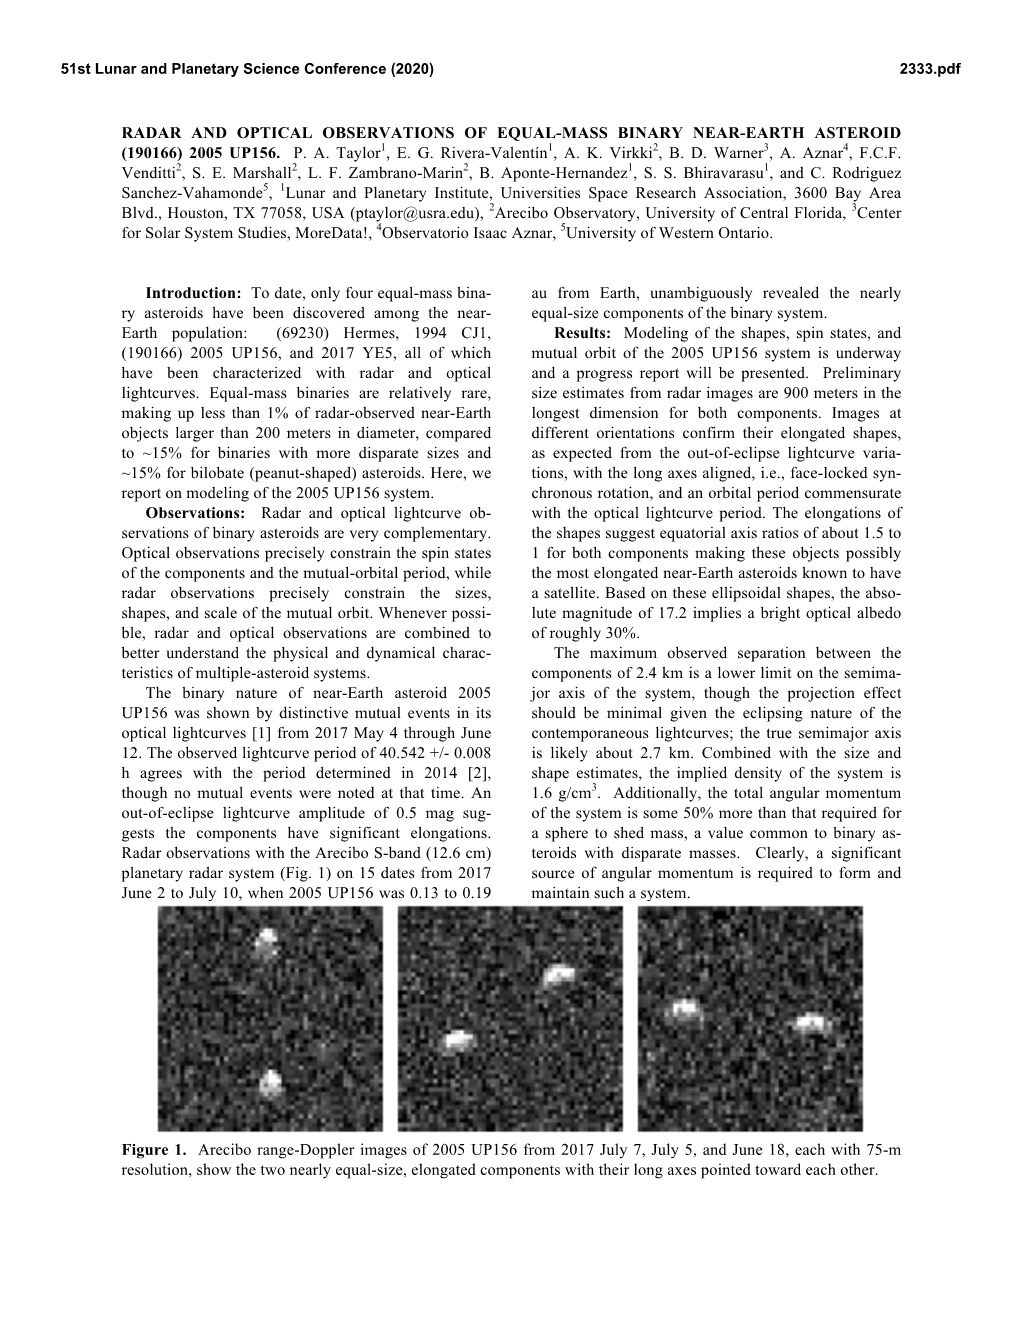 Radar and Optical Observations of Equal-Mass Binary Near-Earth Asteroid (190166) 2005 Up156